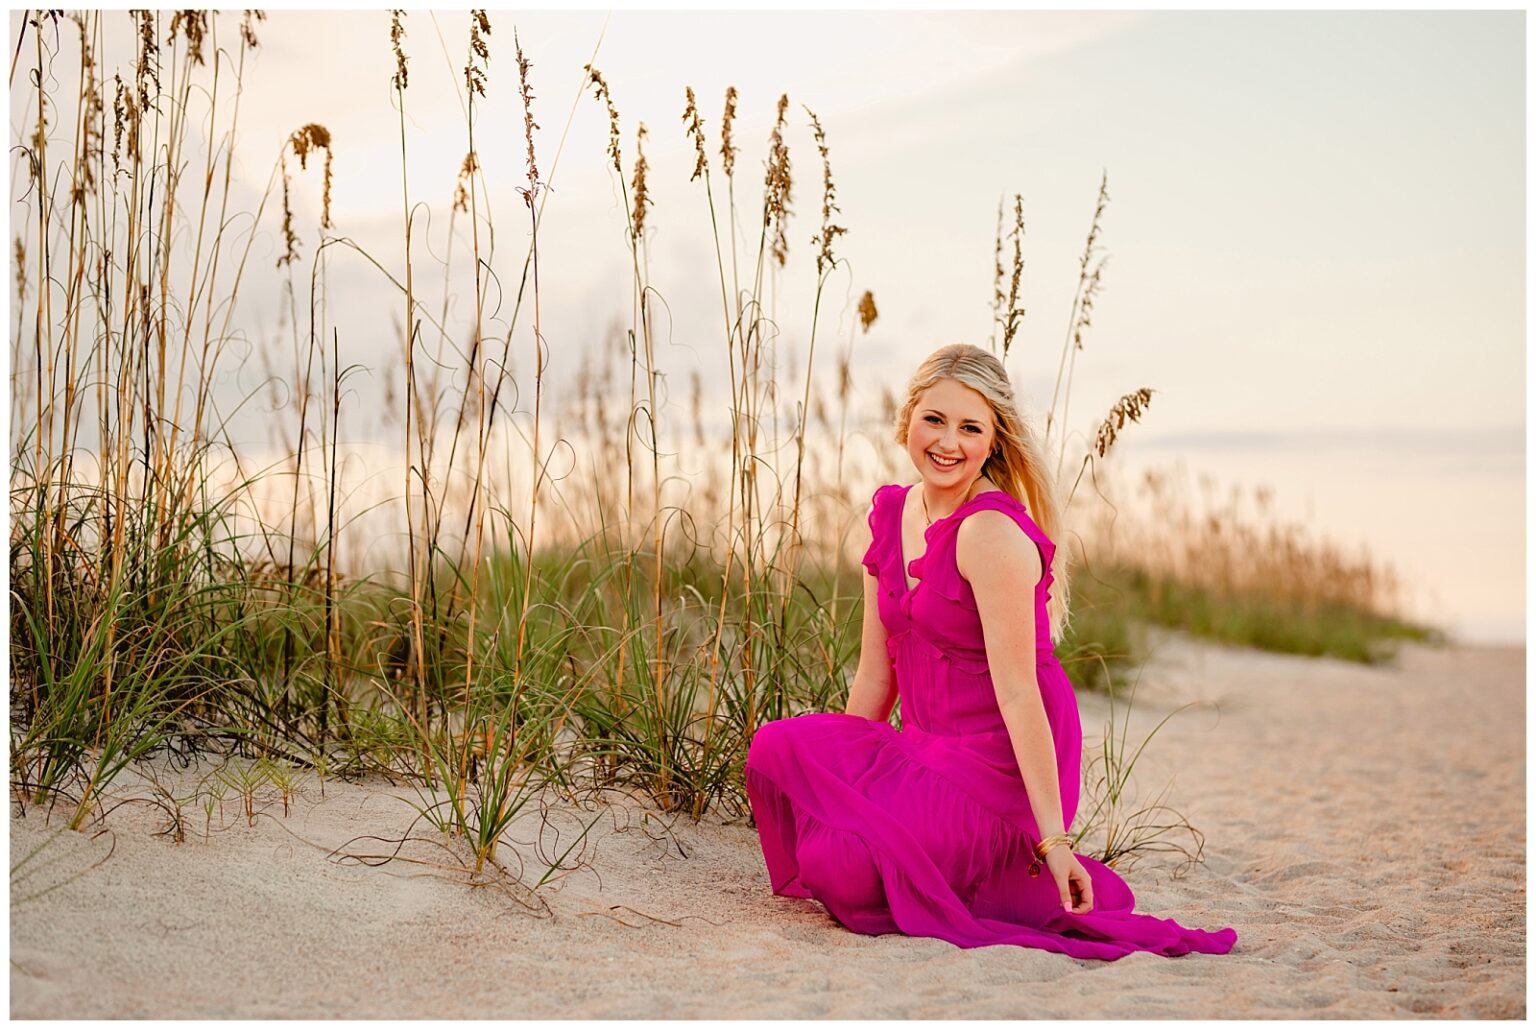 Posing ideas for senior pictures on the beach. Senior Photographer in St Augustine, Florida. Old Town Senior Photographer. Hot pink outfit.